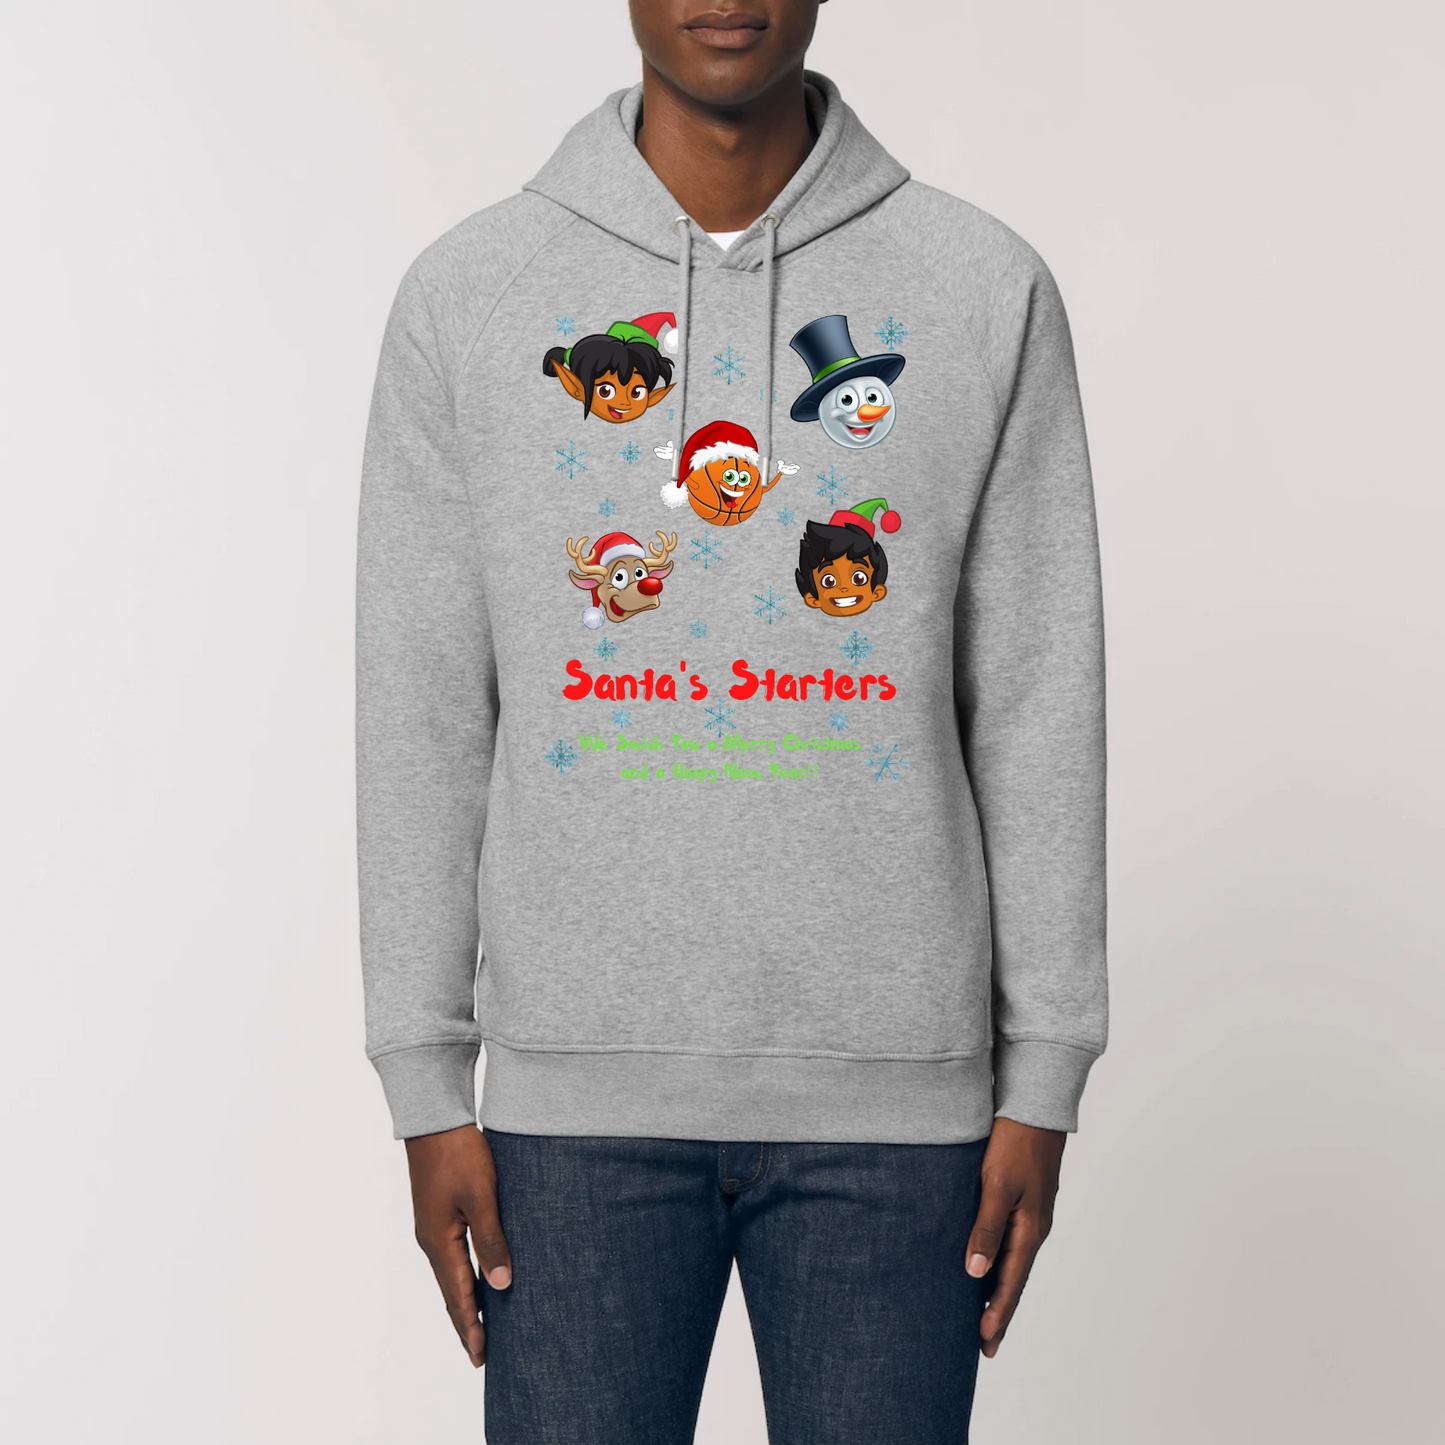 Model wearing a basketball themed Christmas hoodie with 5 cartoon like character heads of 2 elves, 1 snowman, 1 Rudolf and 1 basketball and the heading Santa's Starters and sub heading We Swish you a merry Christmas and a hoopy New Year. The hoodies colour is Grey